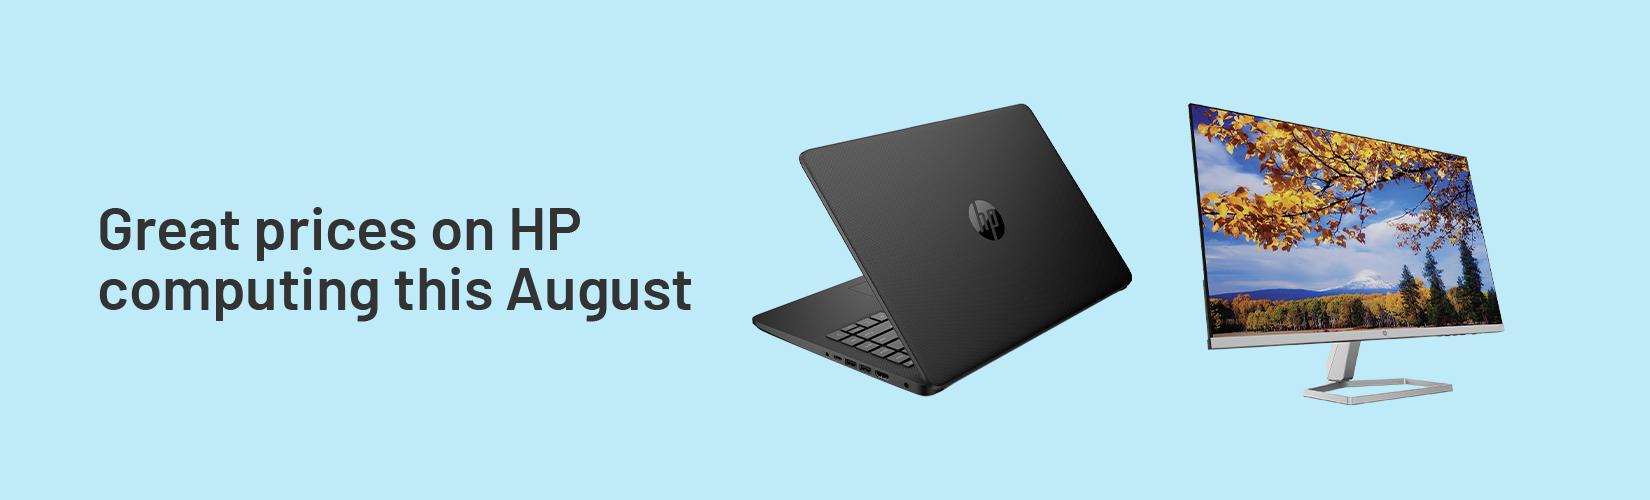 Great prices on HP computing this August.